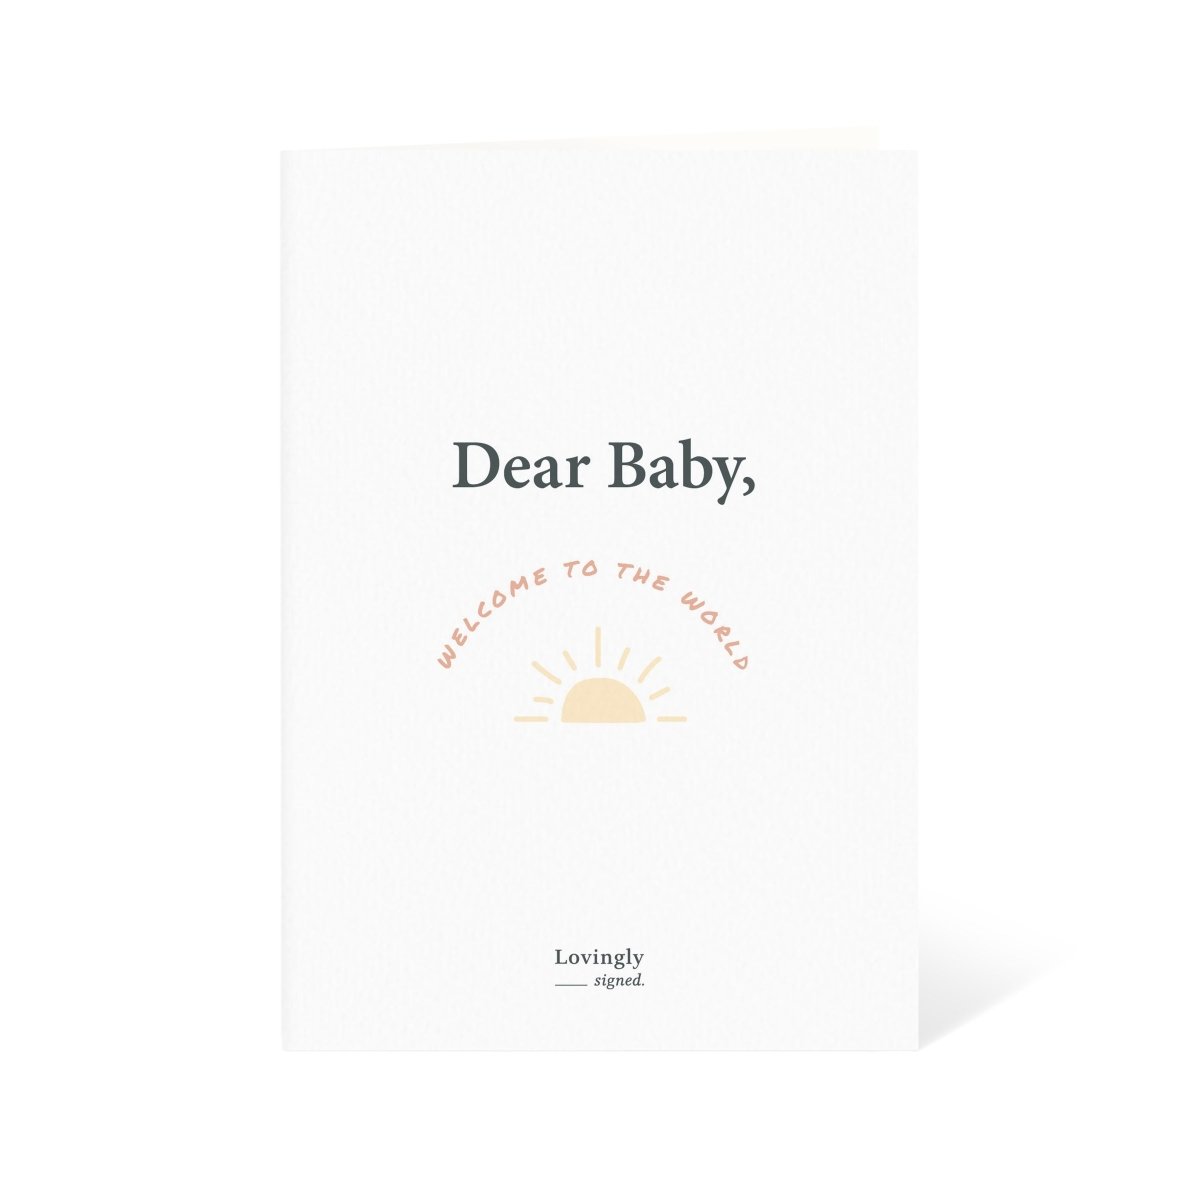 Welcome To The World! Newborn Baby Congratulations Card - LOVINGLY SIGNED (HK)